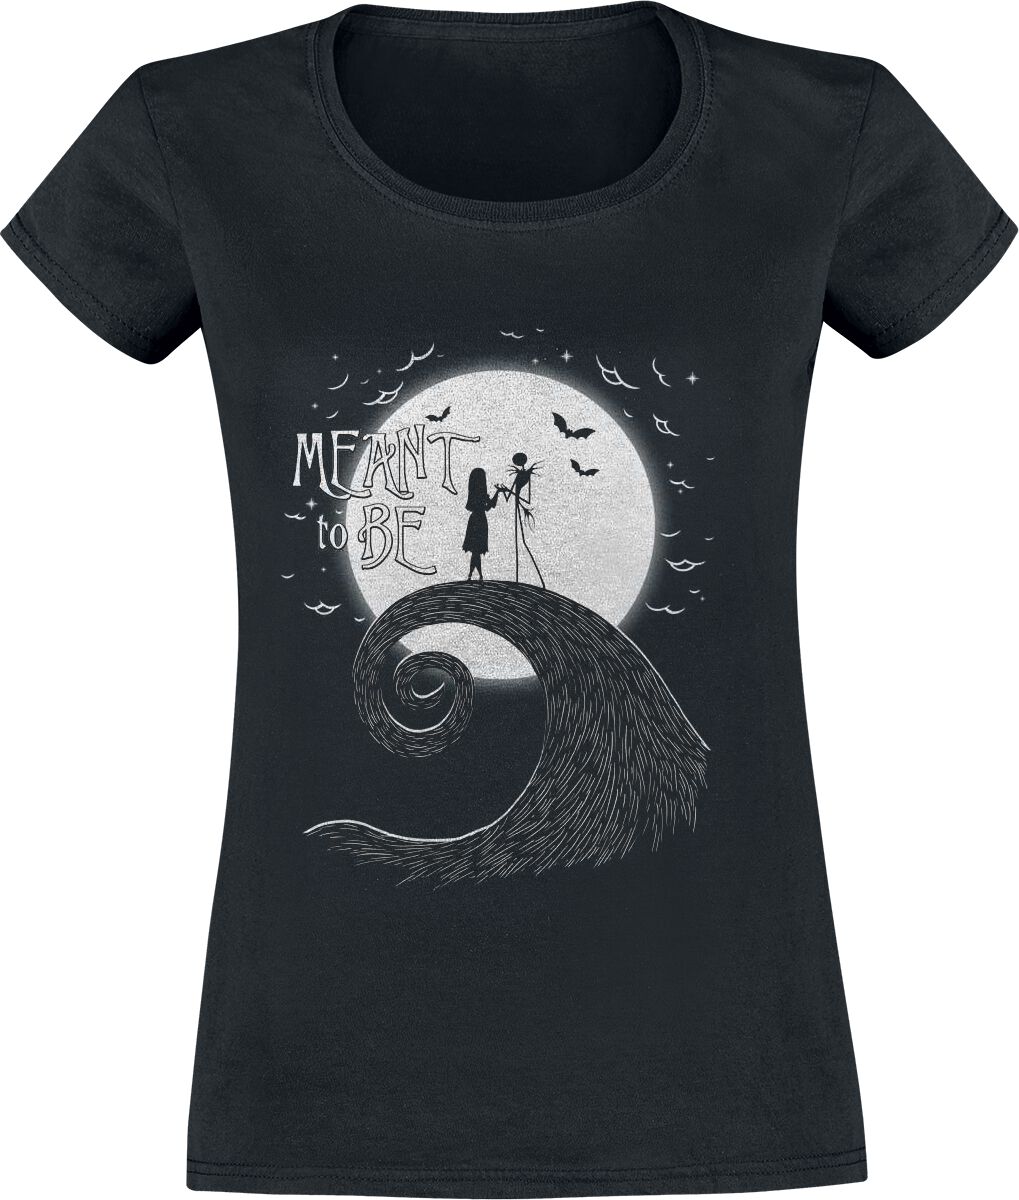 The Nightmare Before Christmas Meant To Be T-Shirt black